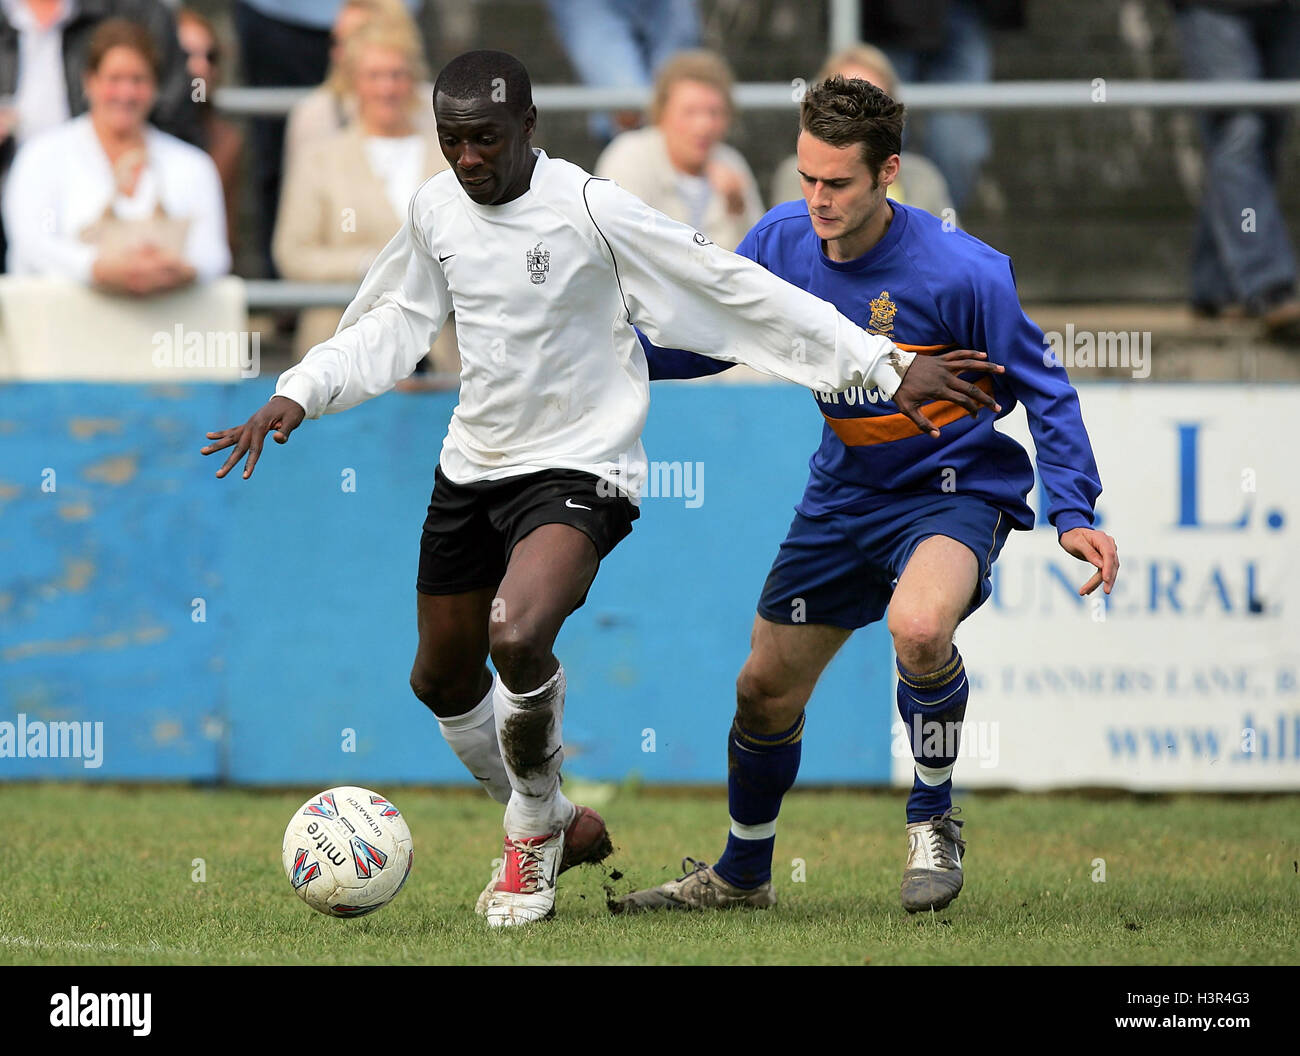 Michael Begg of Brentwood Town FC (L) in action against Romford's Paul Clayton - 07/05/07. Stock Photo